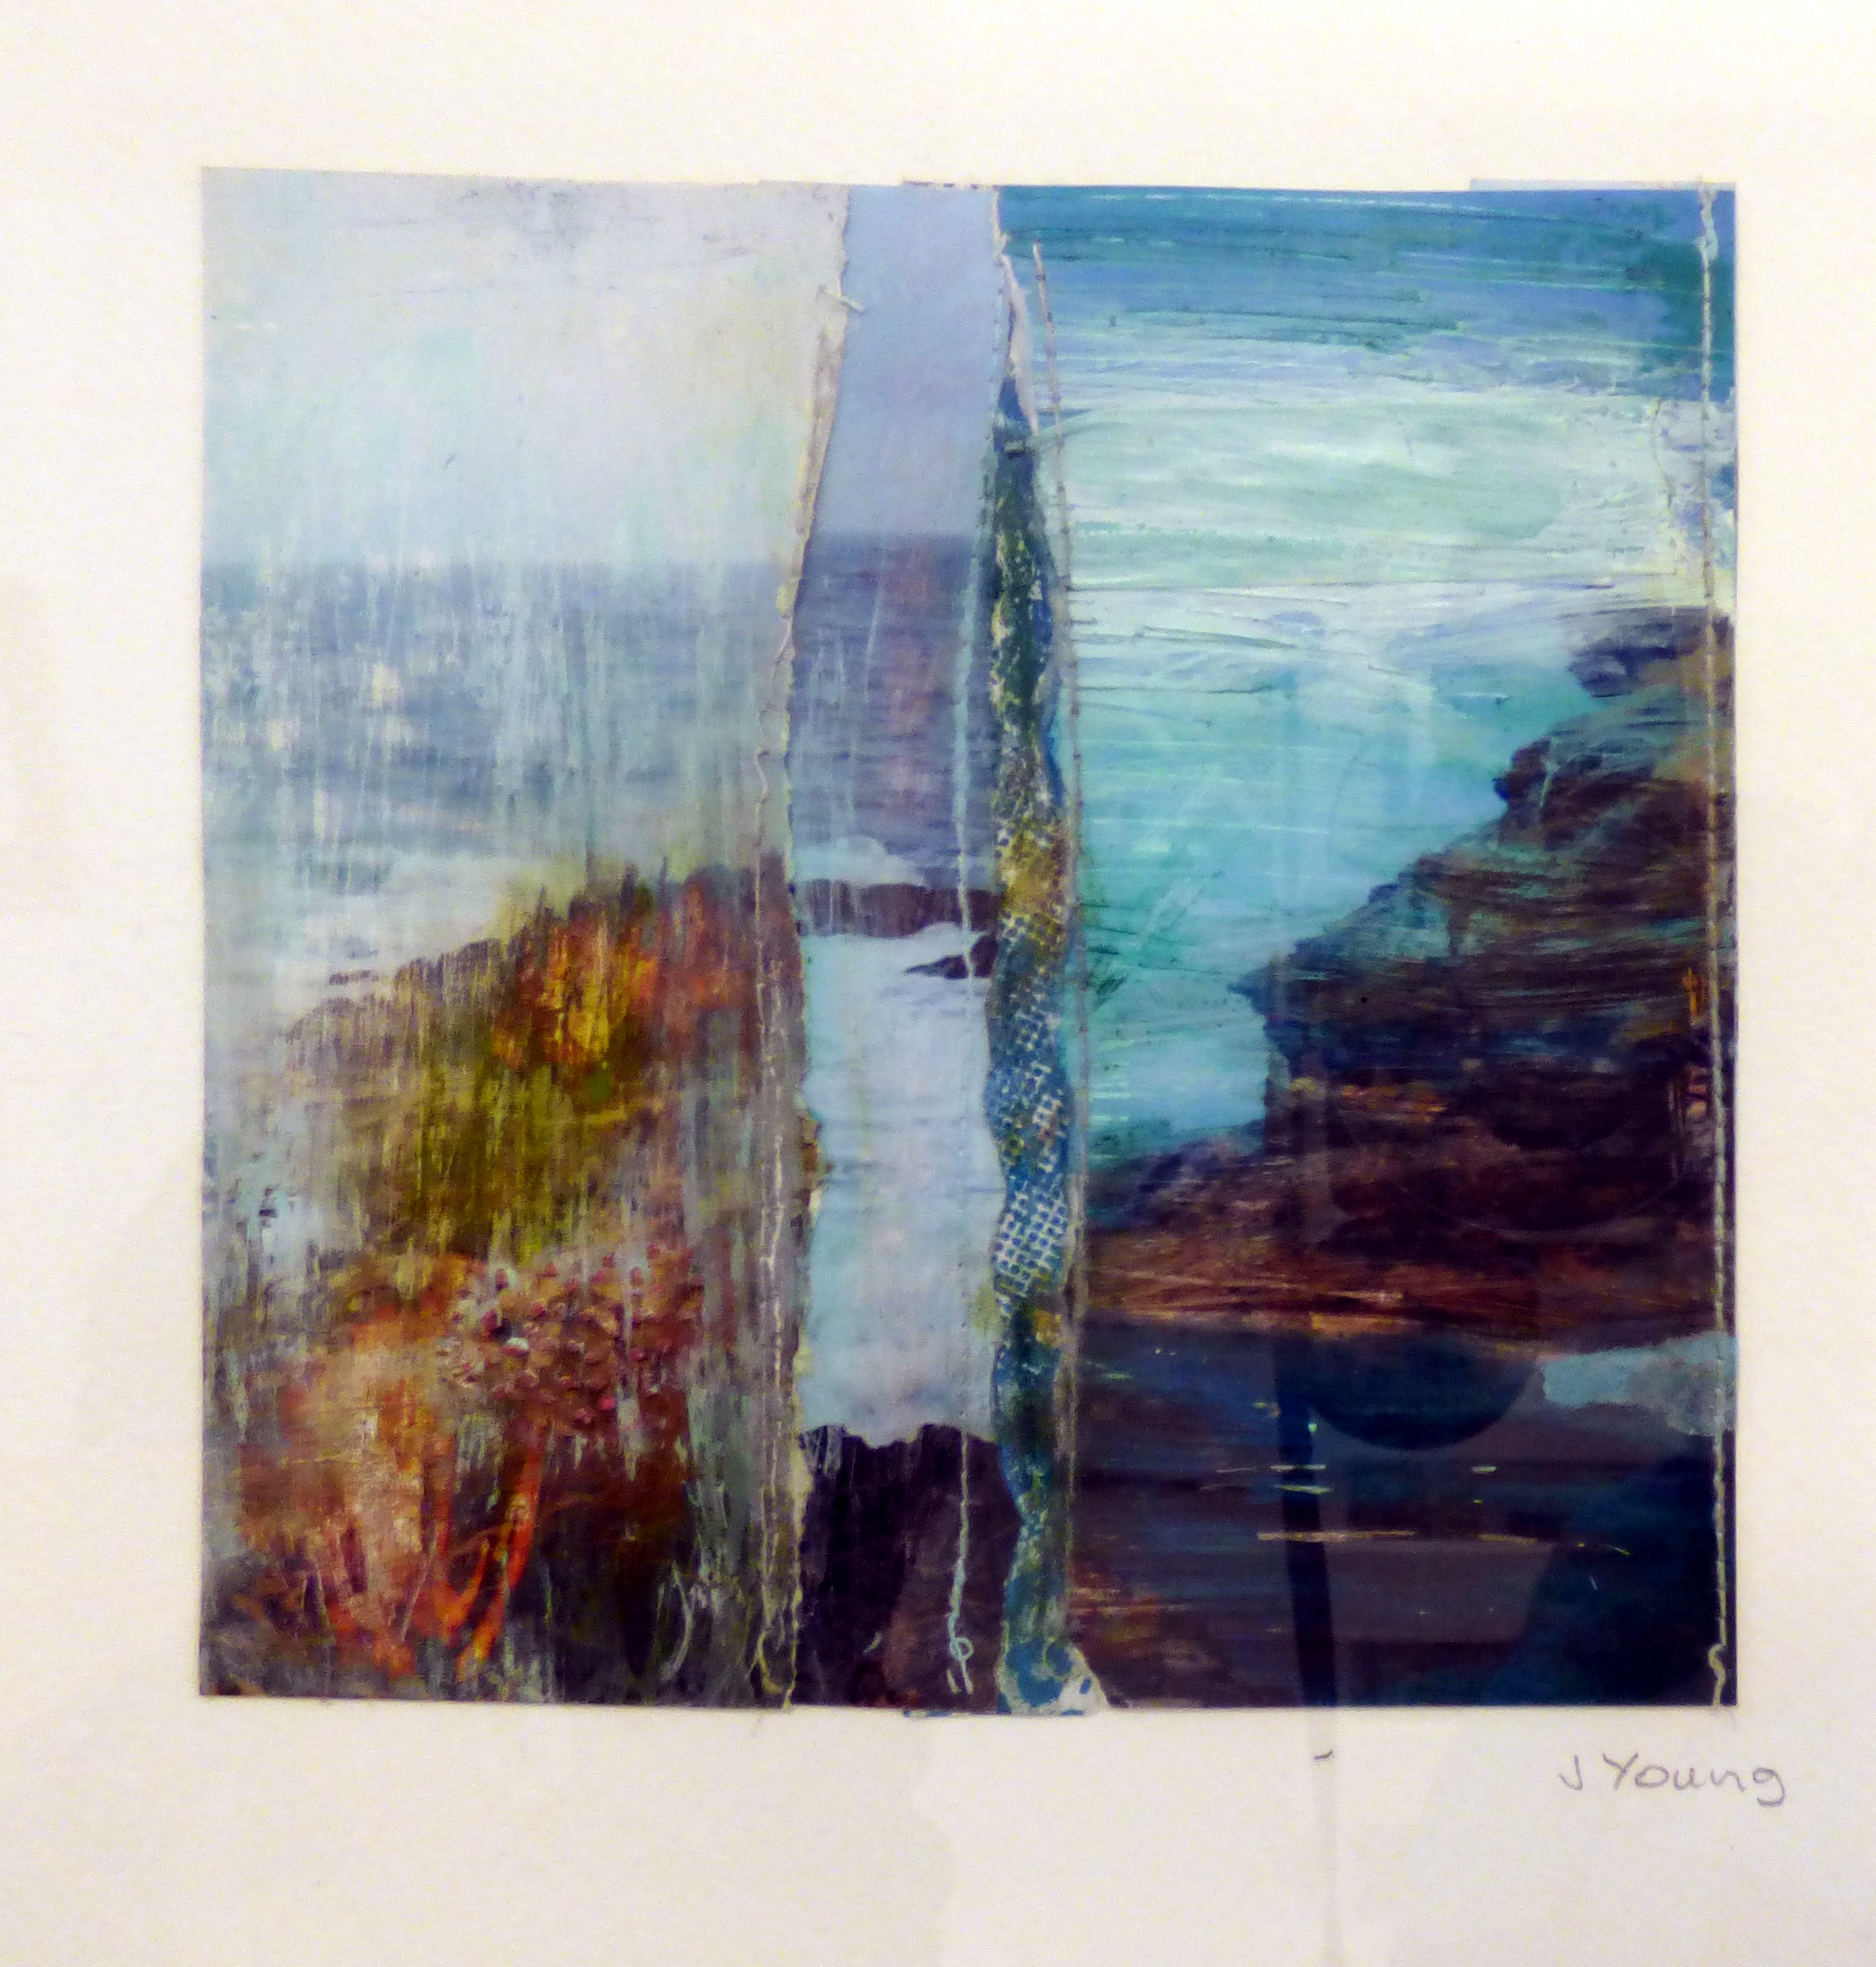 CORNISH COAST 1 by Joyce Young, altered photograpgs and stitch, ConText group 2018